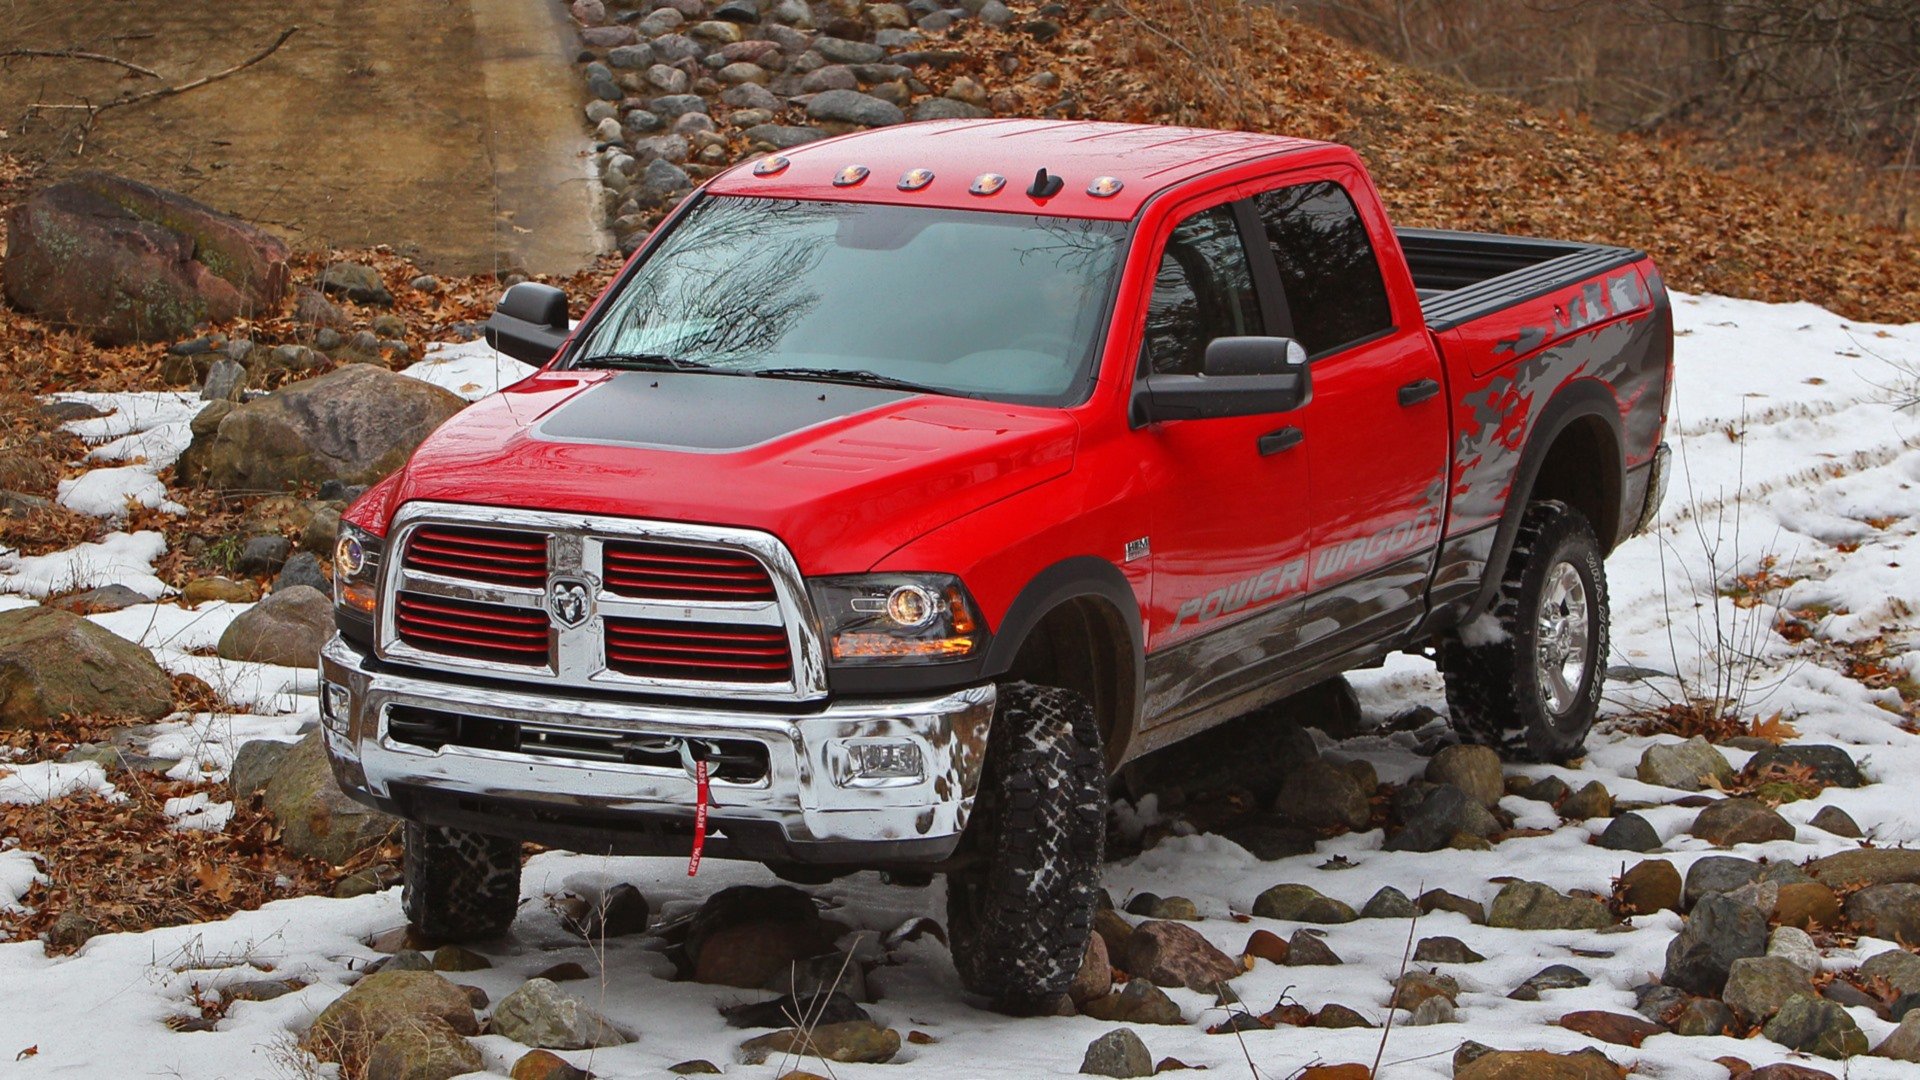 Download full hd Dodge Ram PC background ID:259008 for free